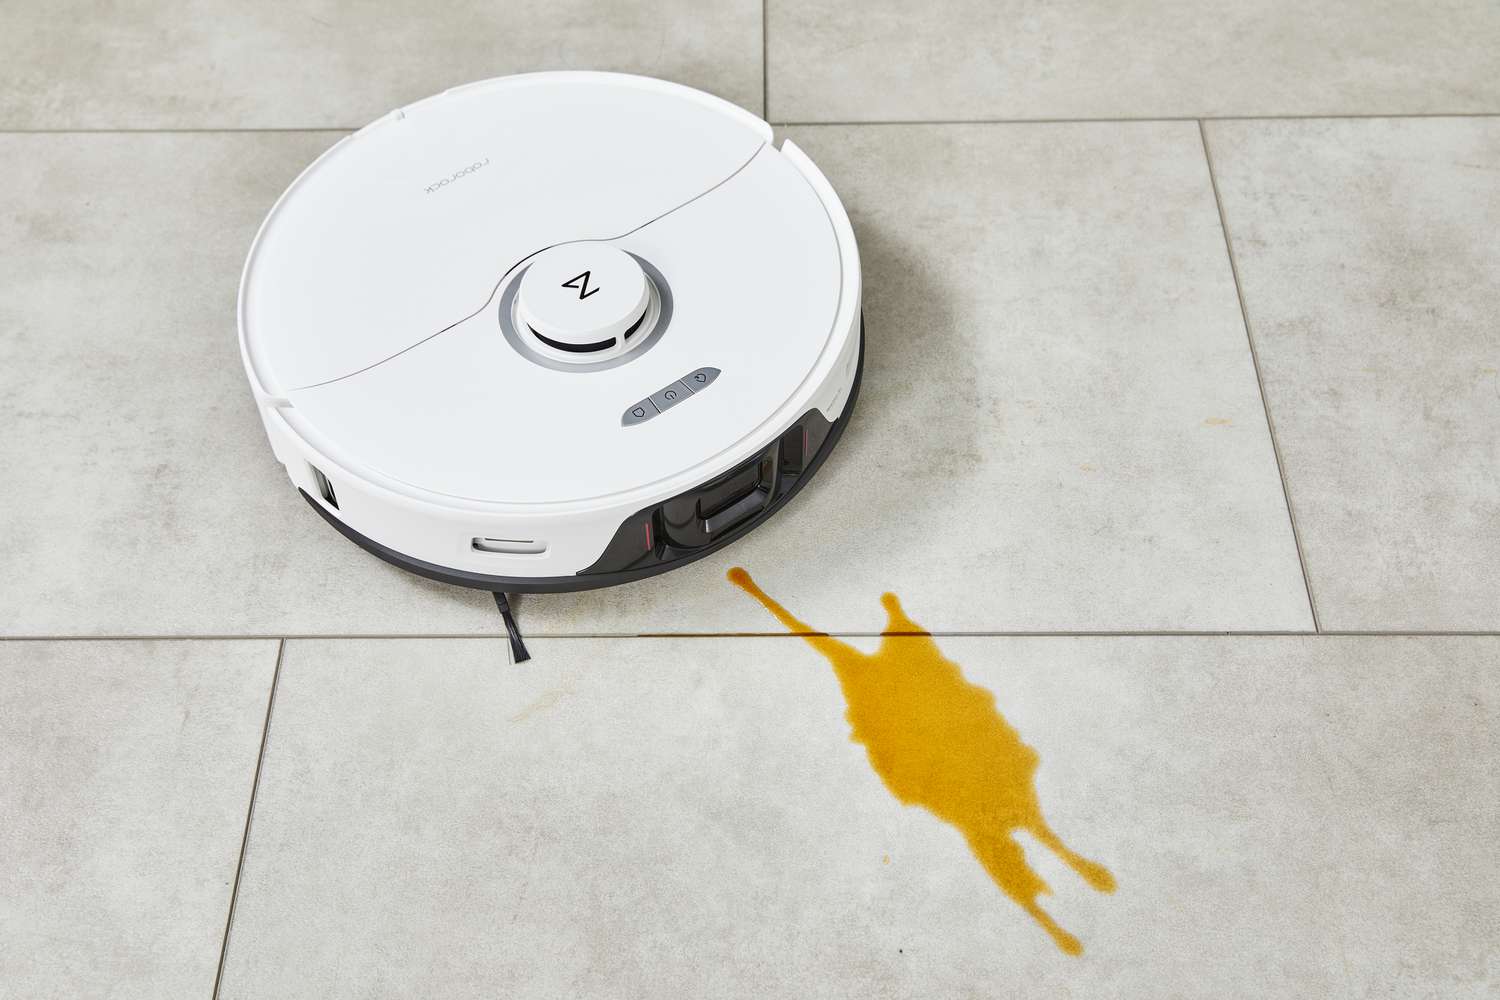 The Roborock S8 Pro Ultra cleans up a liquid spill on a tile floor